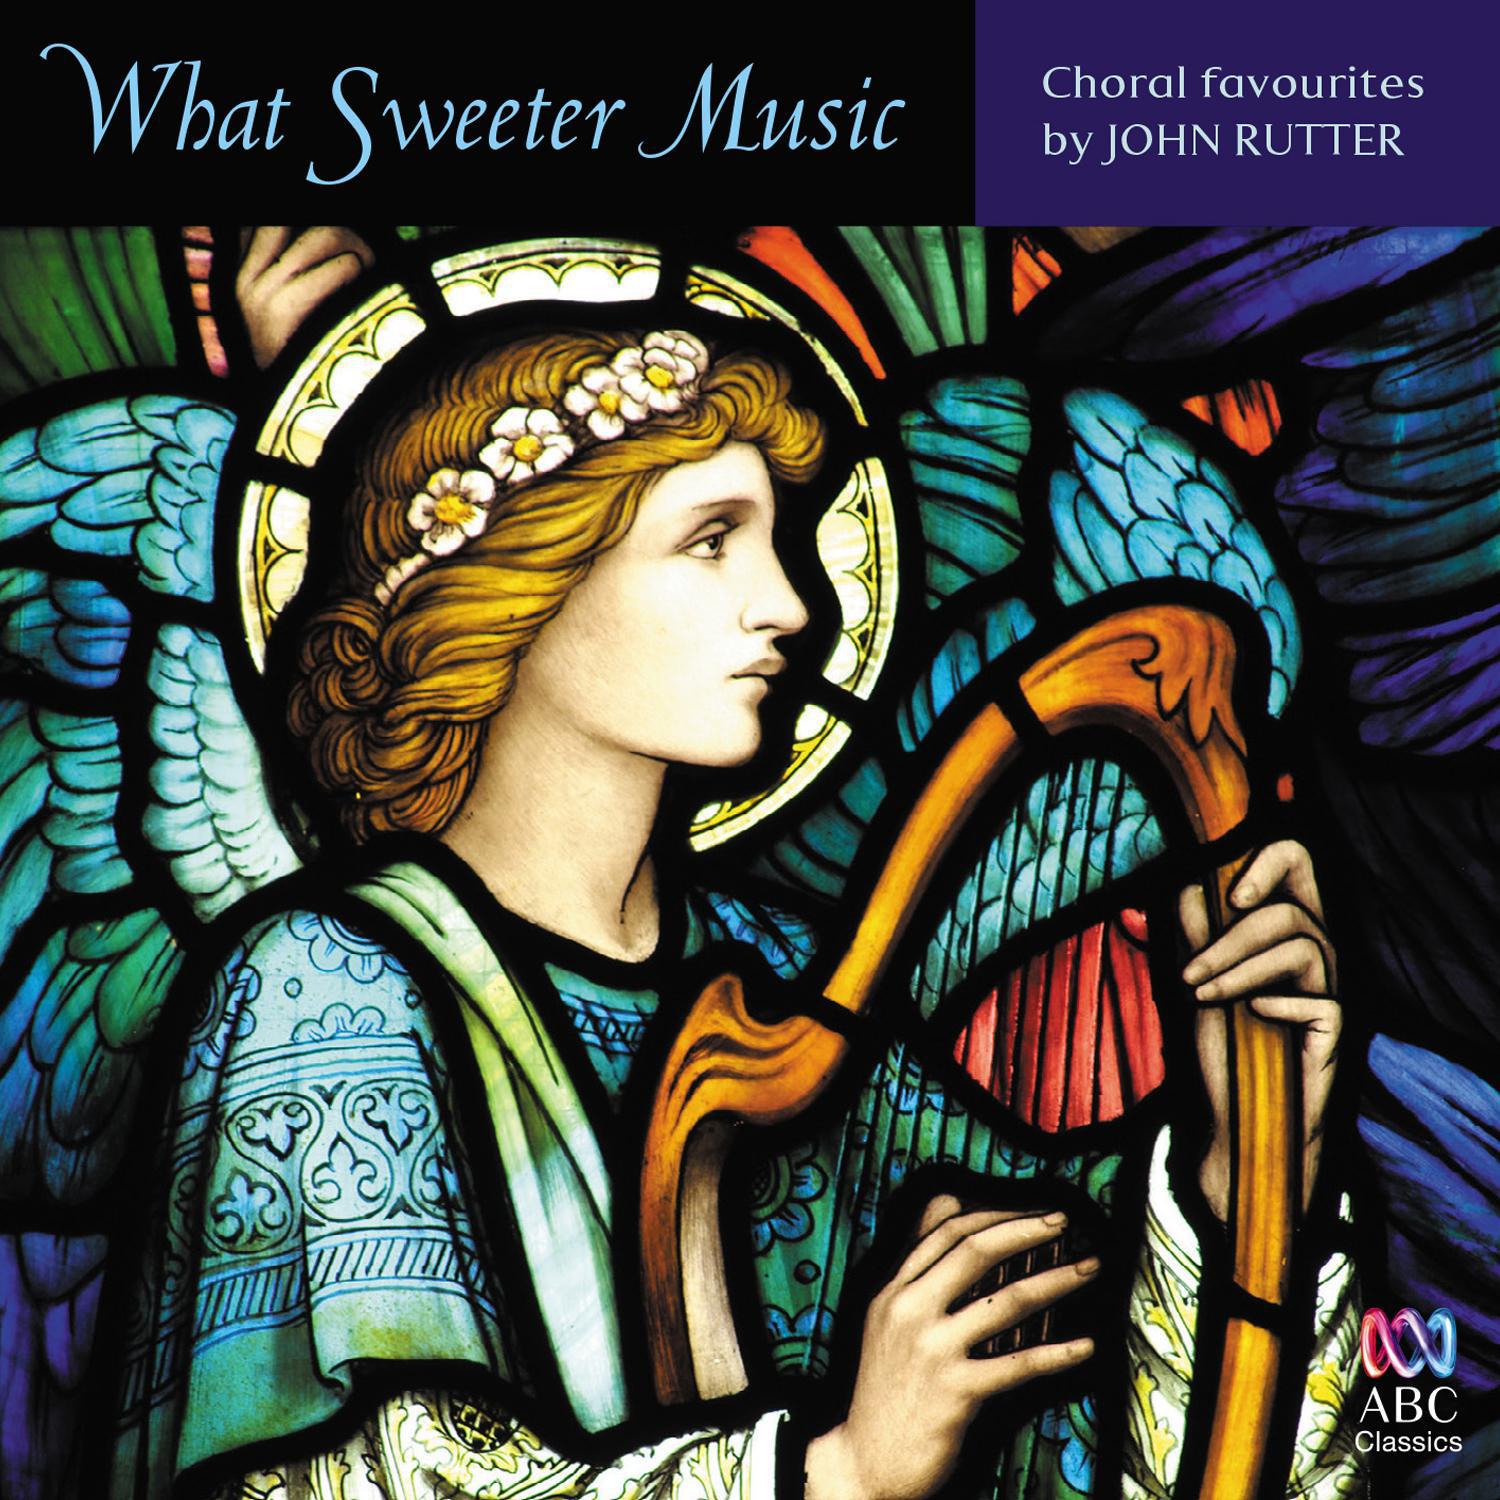 What Sweeter Music: Choral Favourites by John Rutter